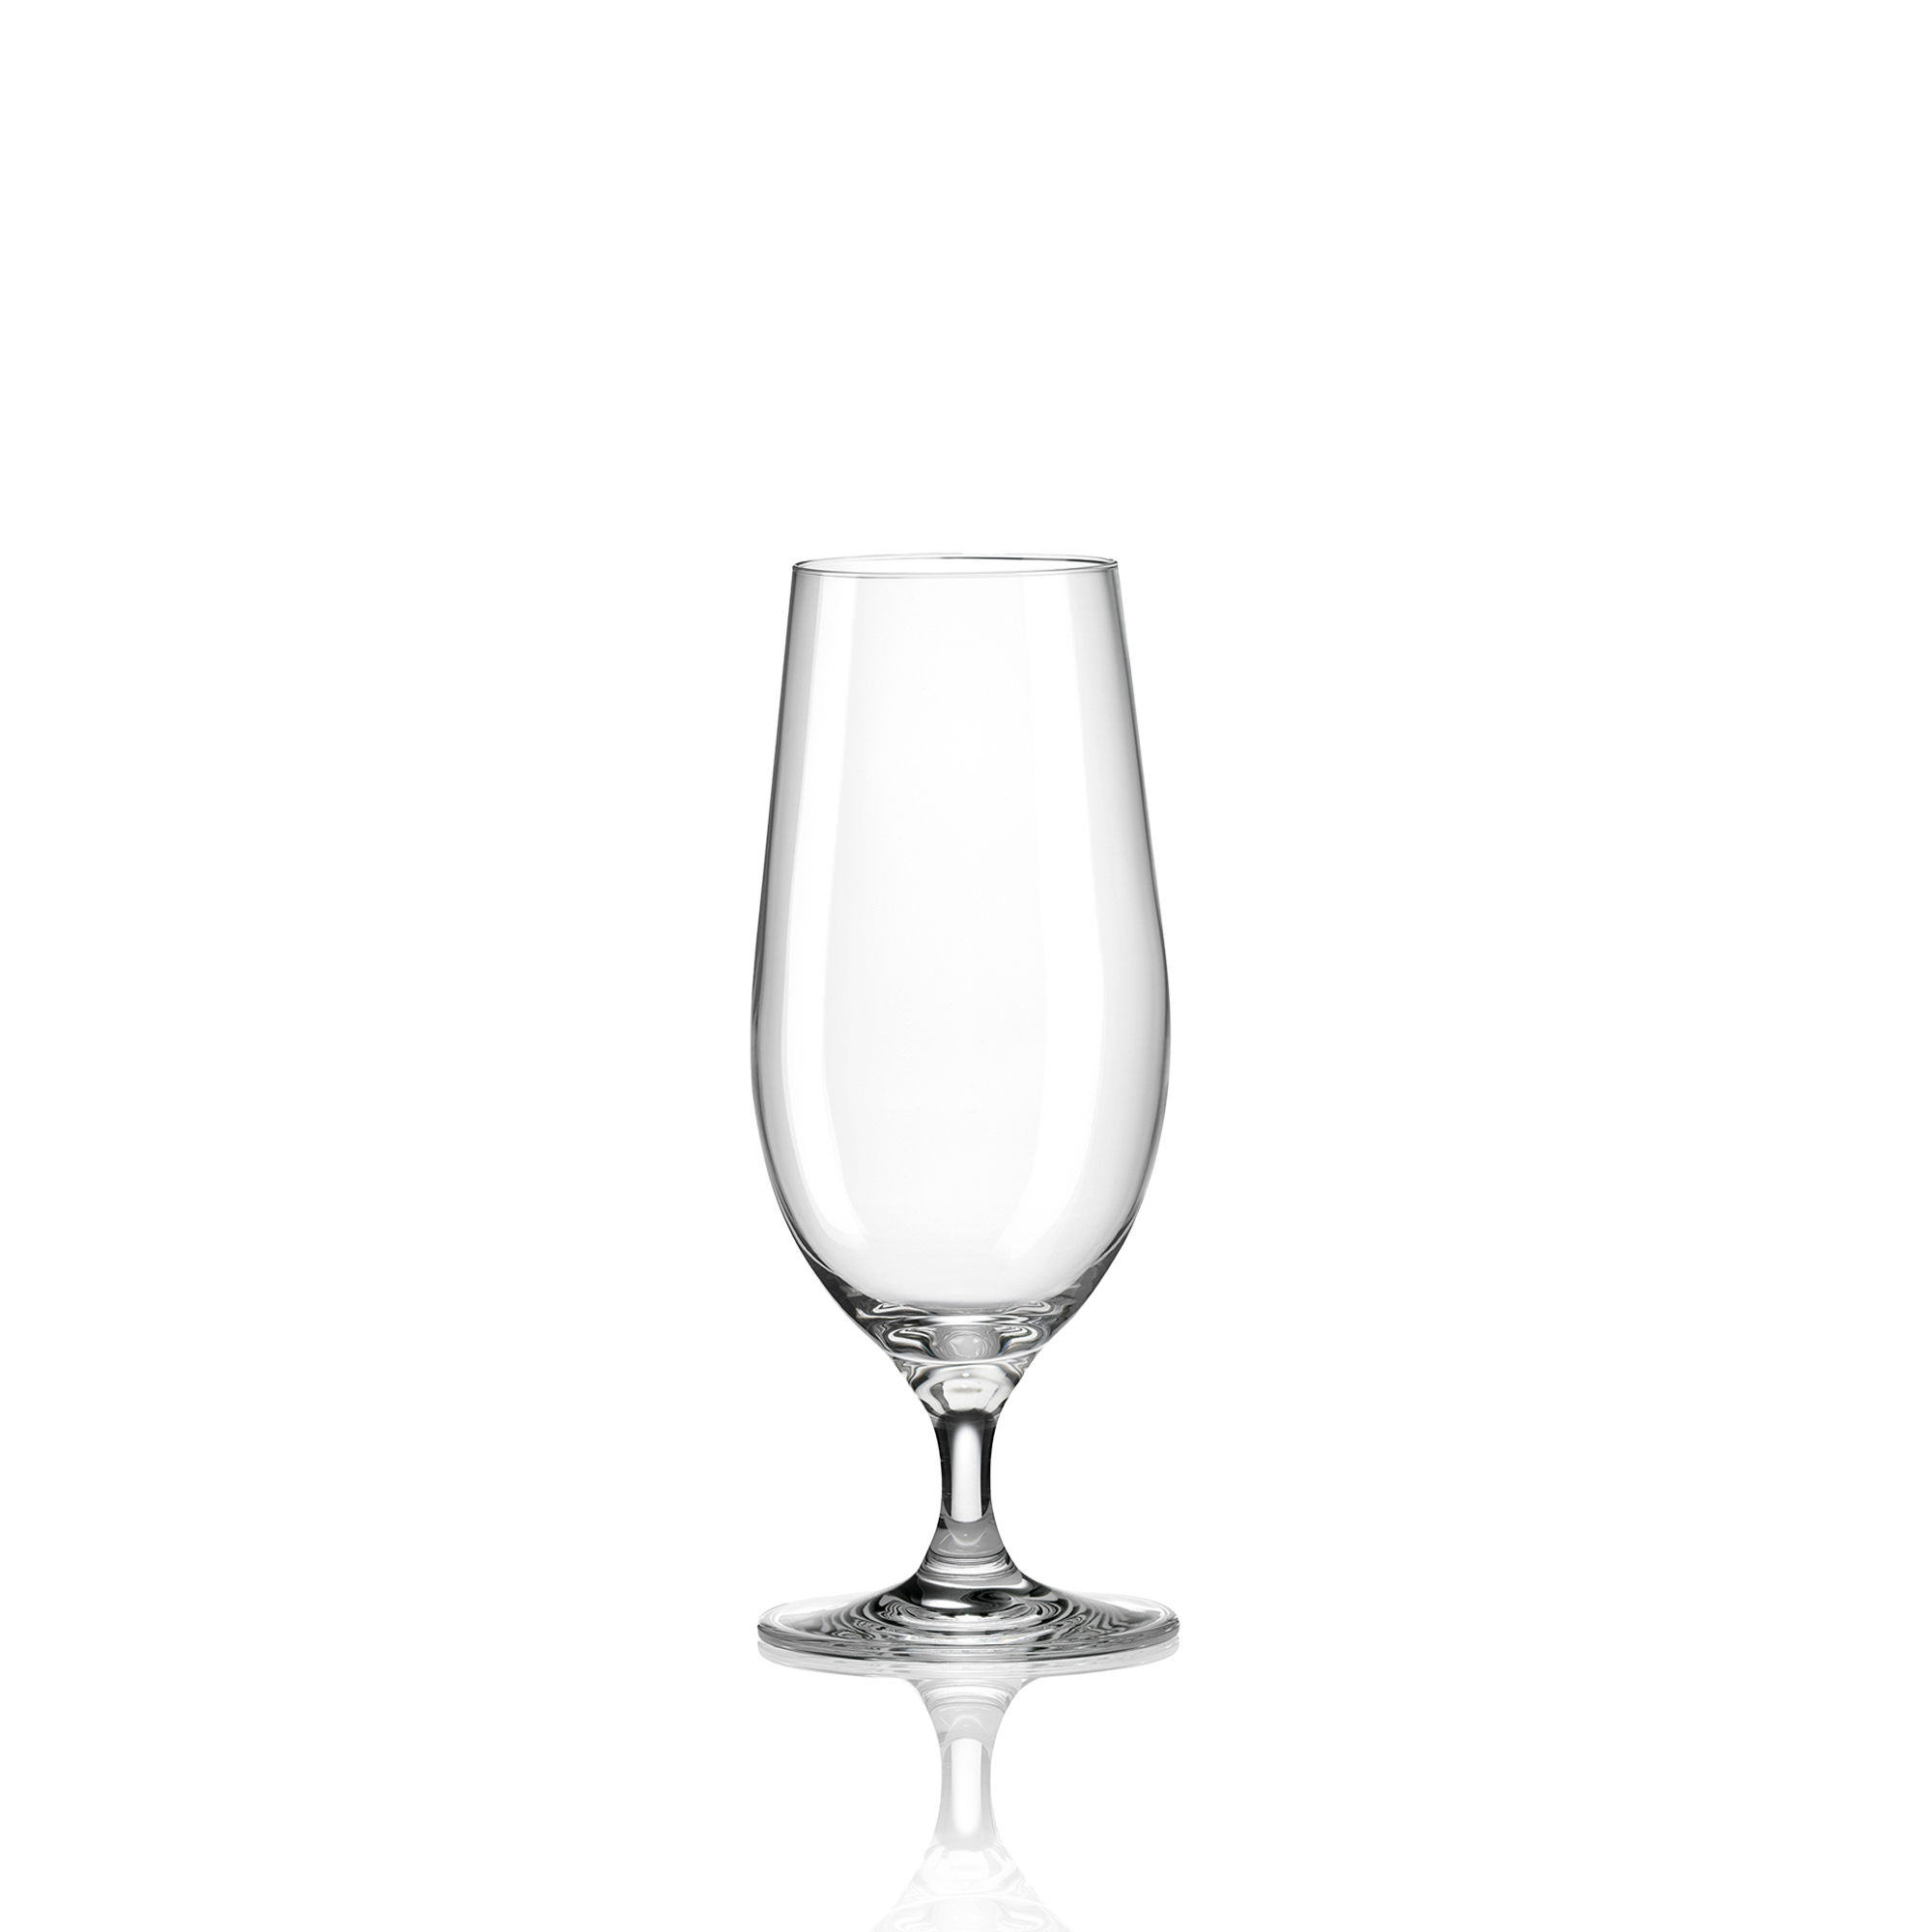 Made In Cookware - Stemmed Beer Glasses - 14 oz - Set of 4 -  Italian Made Crystal Glass - Titanium-Reinforced Stem Italy: Beer Glasses